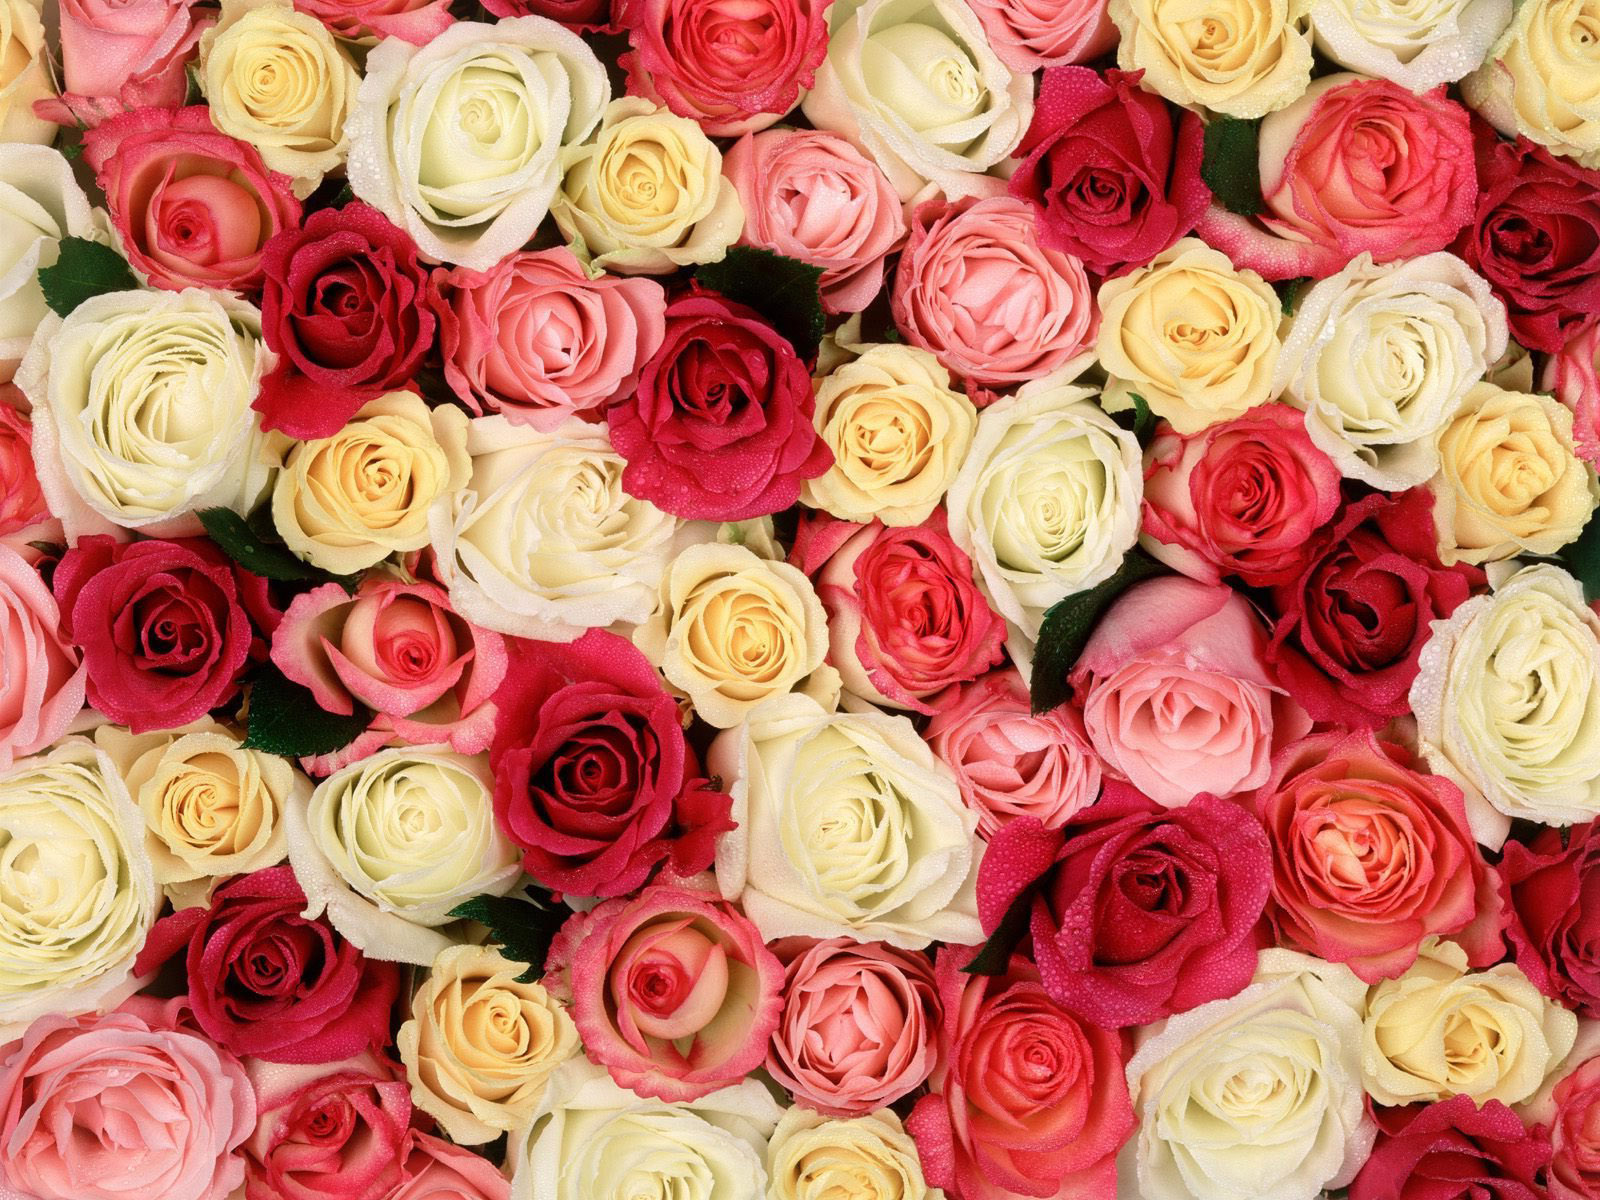 Roses Background Gallery Yopriceville High Quality Images And